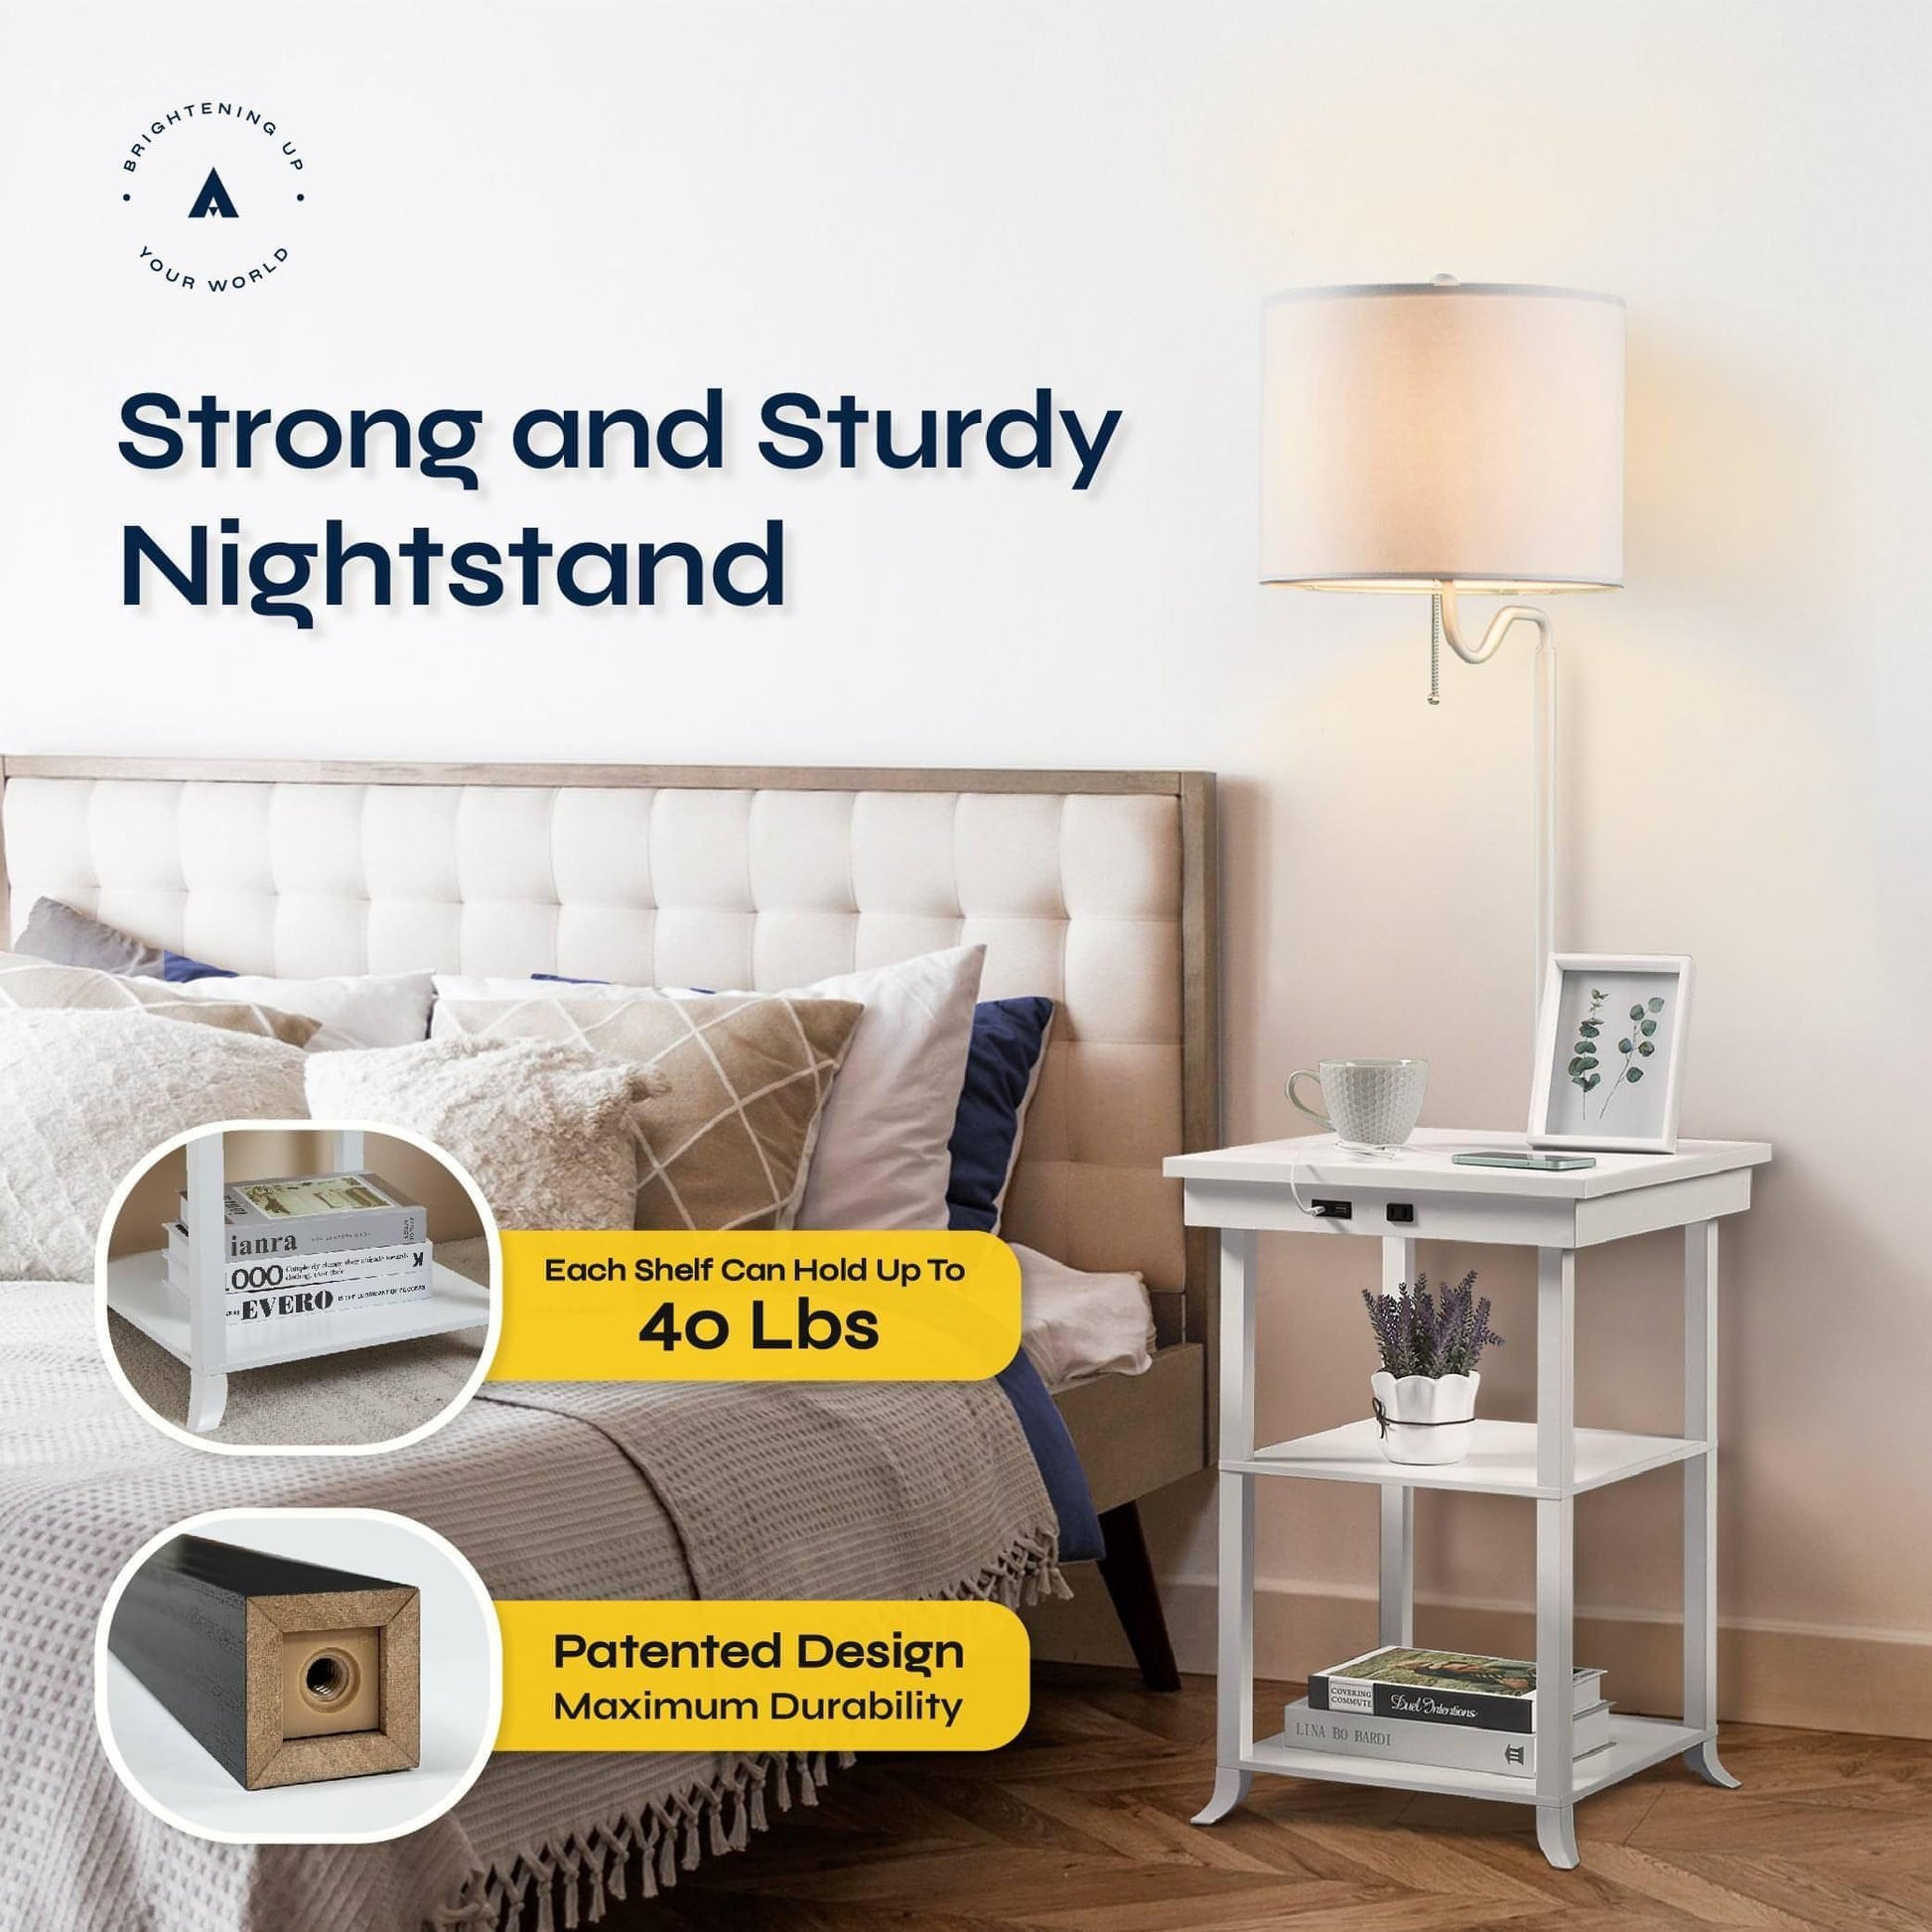 ATAMIN Ava Bedside Table with Lamp and USB-C Charging Station